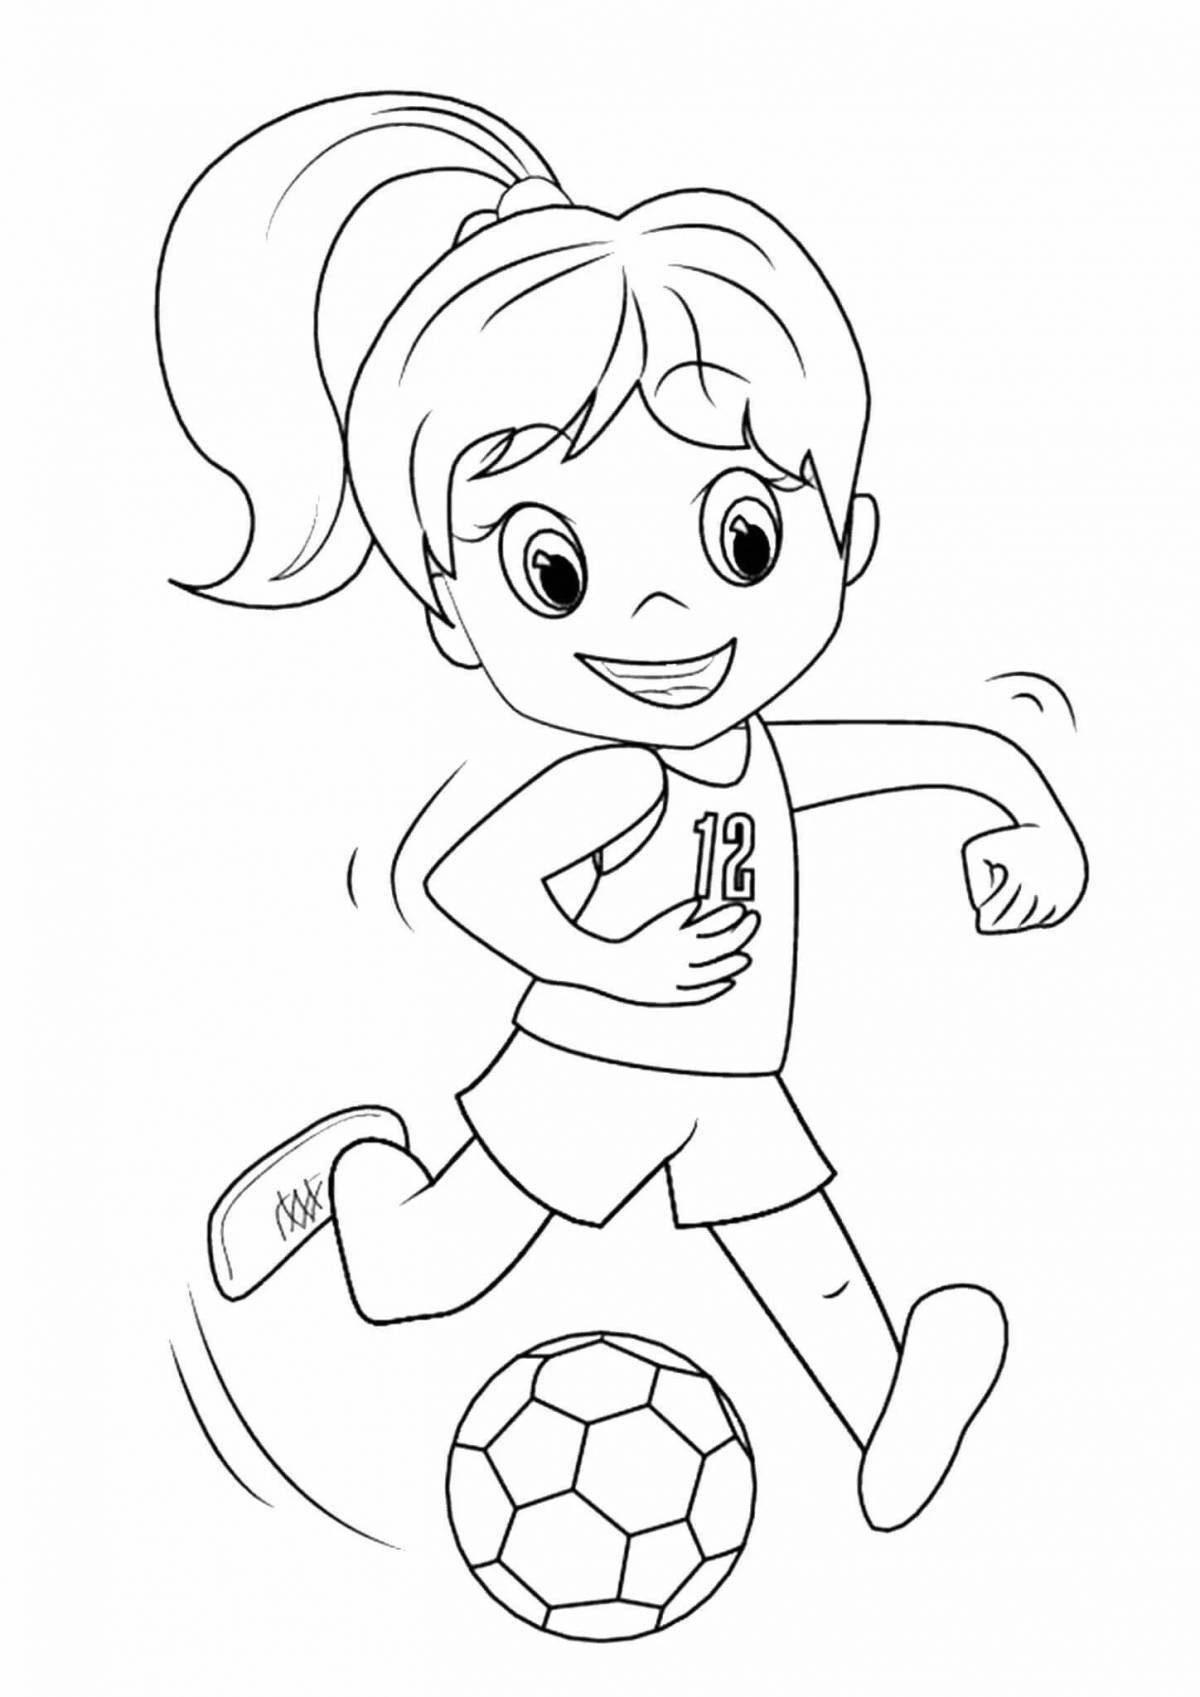 Fun coloring physical education and sports